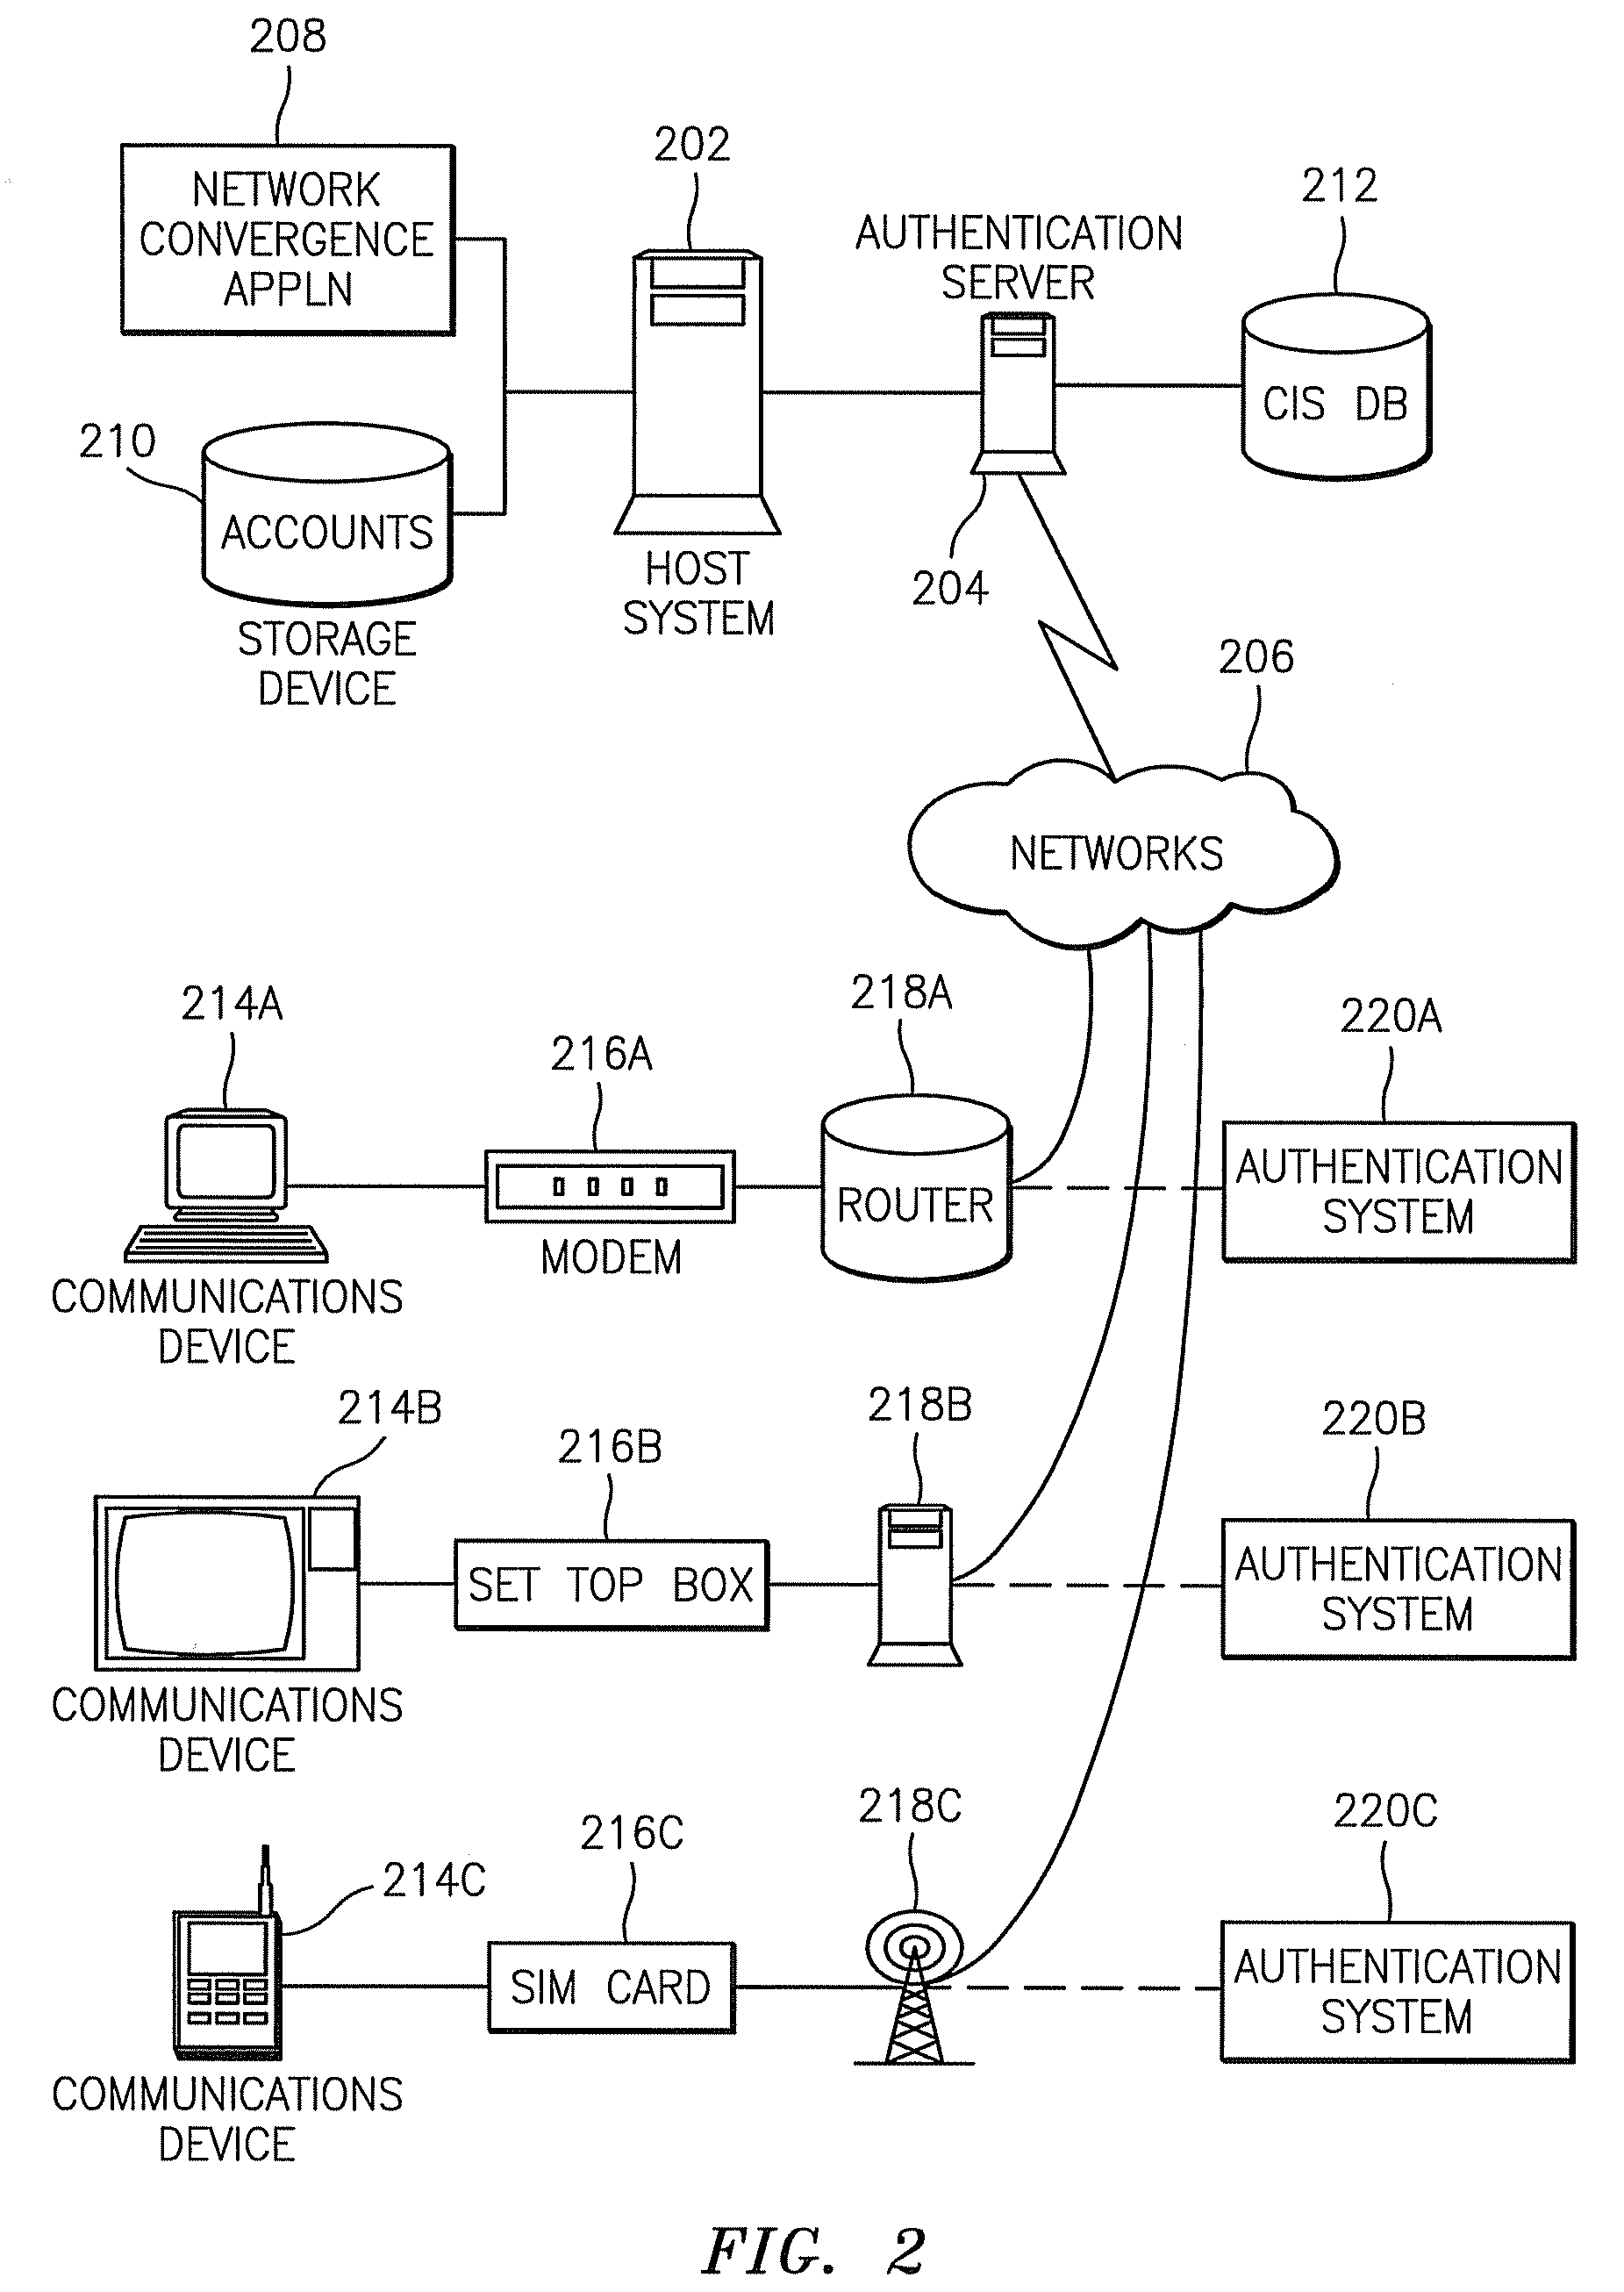 Methods, systems, and computer program products for providing network convergence of applications and devices